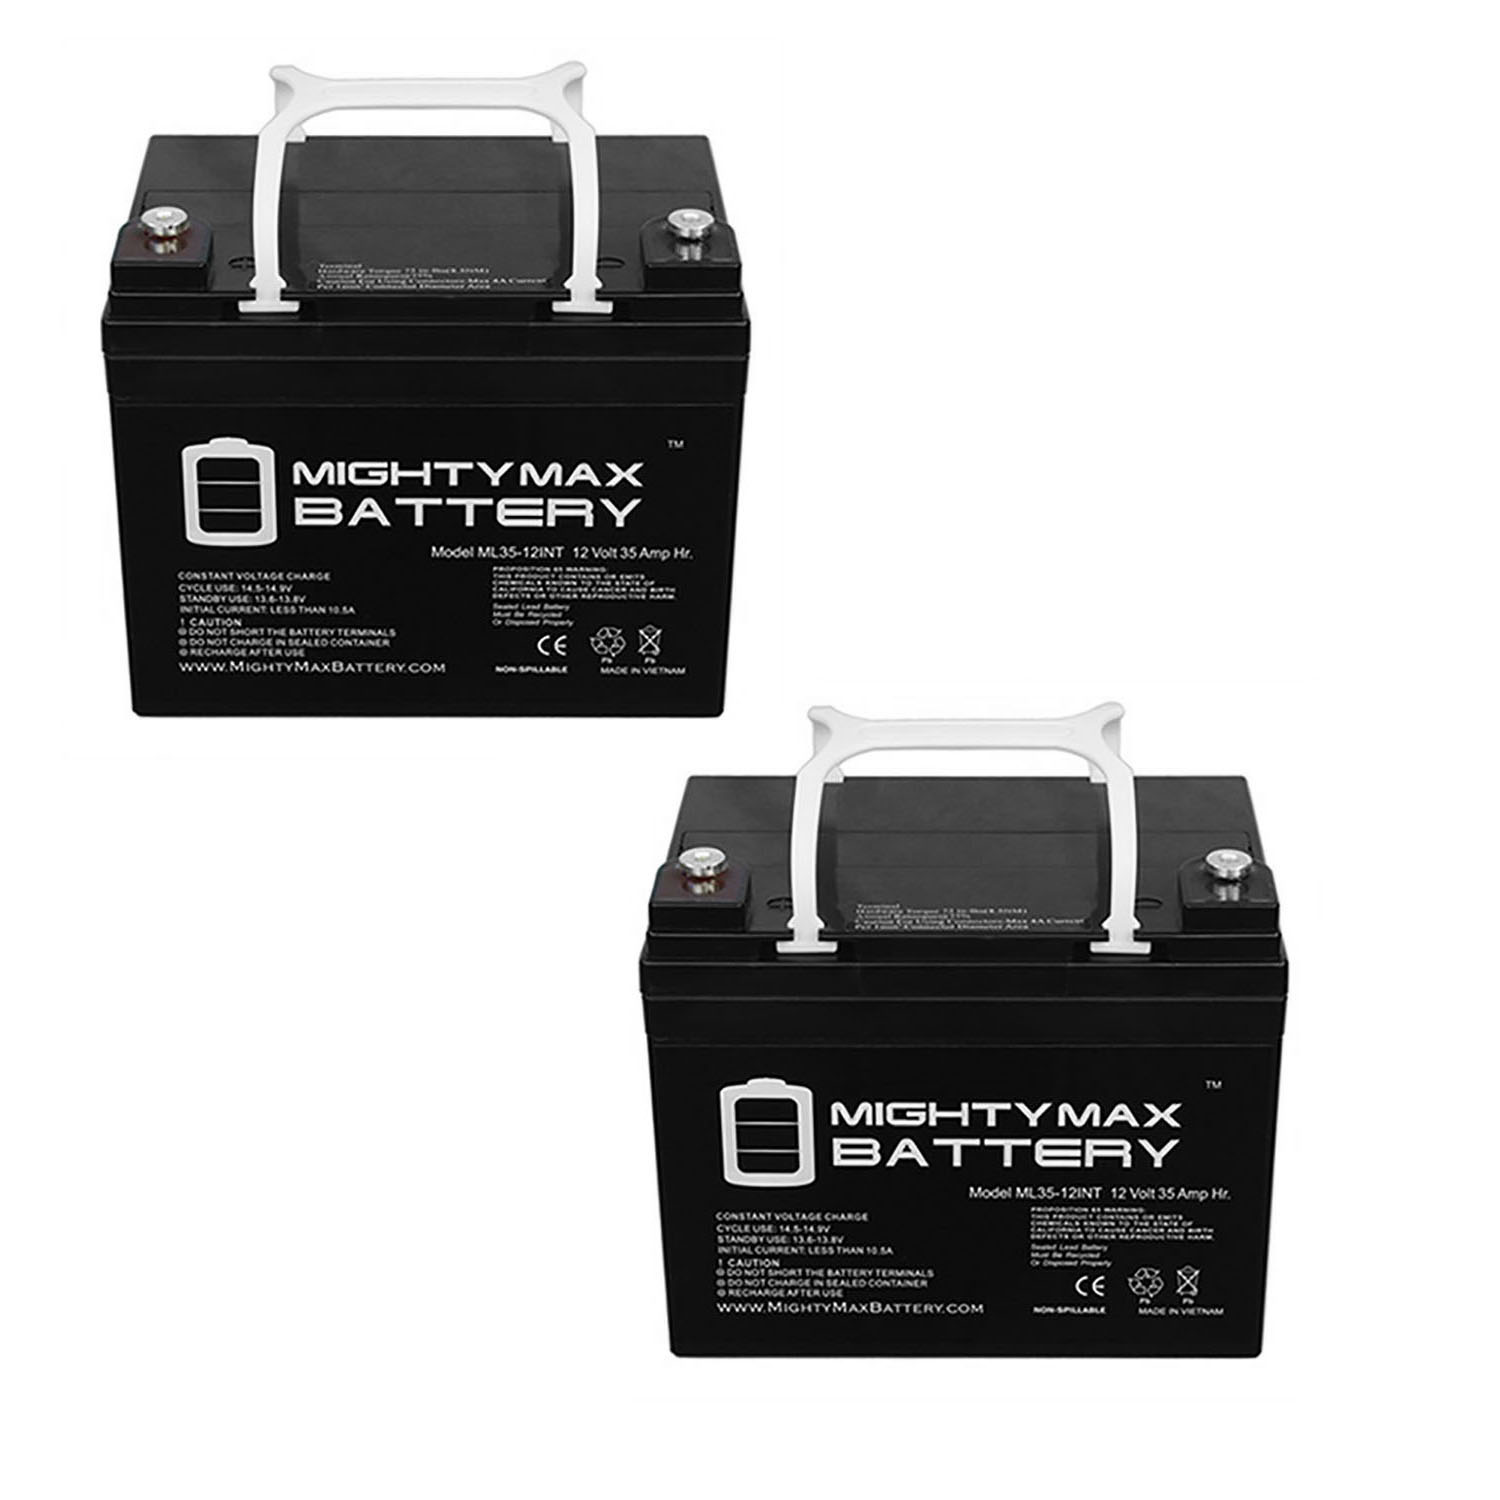 12V 35AH INT Replacement Battery for Hoveround HRV 100 - 2 Pack